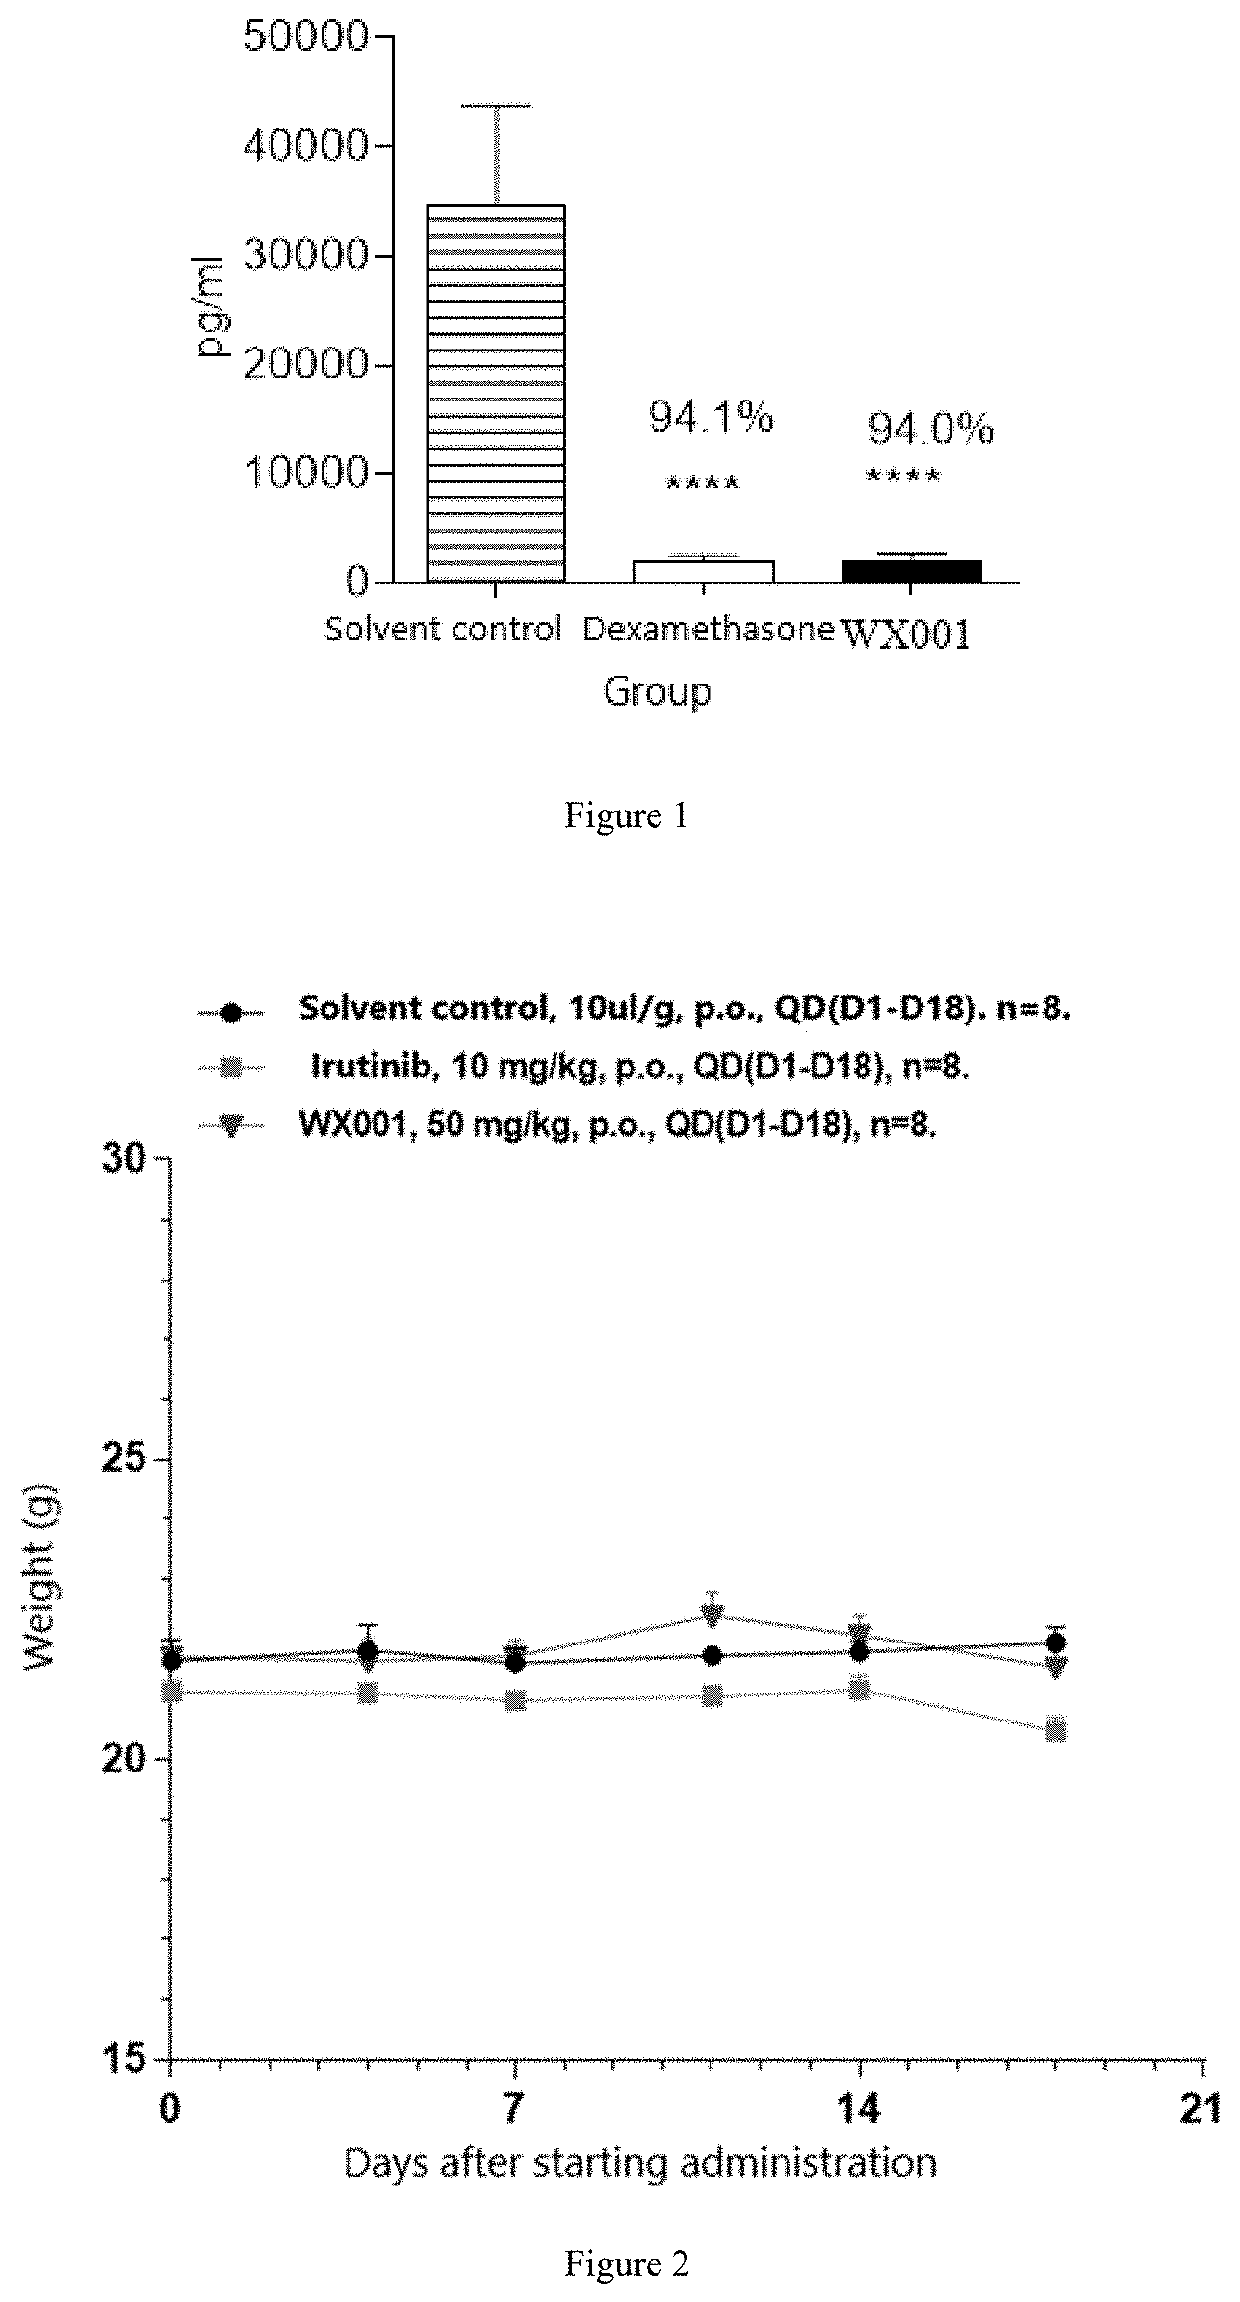 Oxazole compound as multi-targeted inhibitor of irak4 and btk